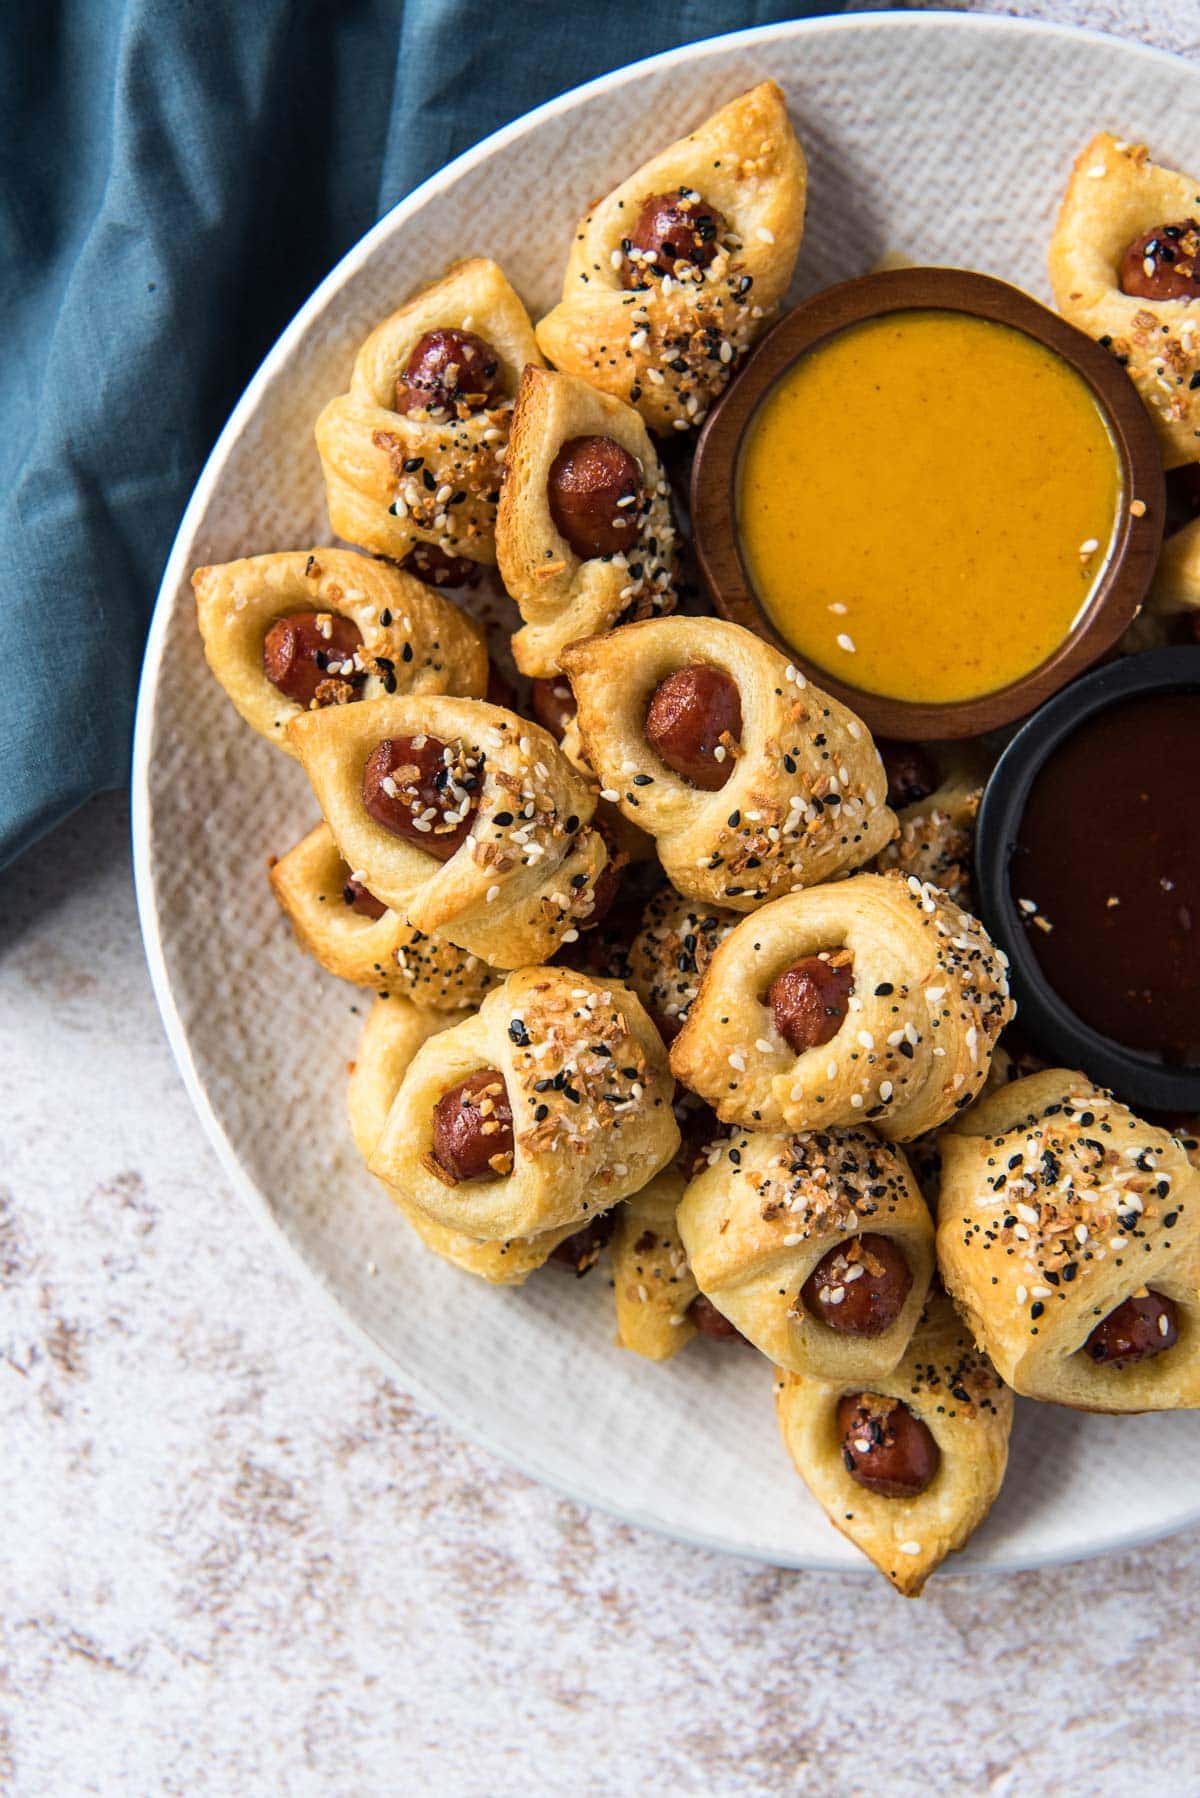 white platter with sausages wrapped in dough with bagel seasoning on top, a dish of honey mustard dip